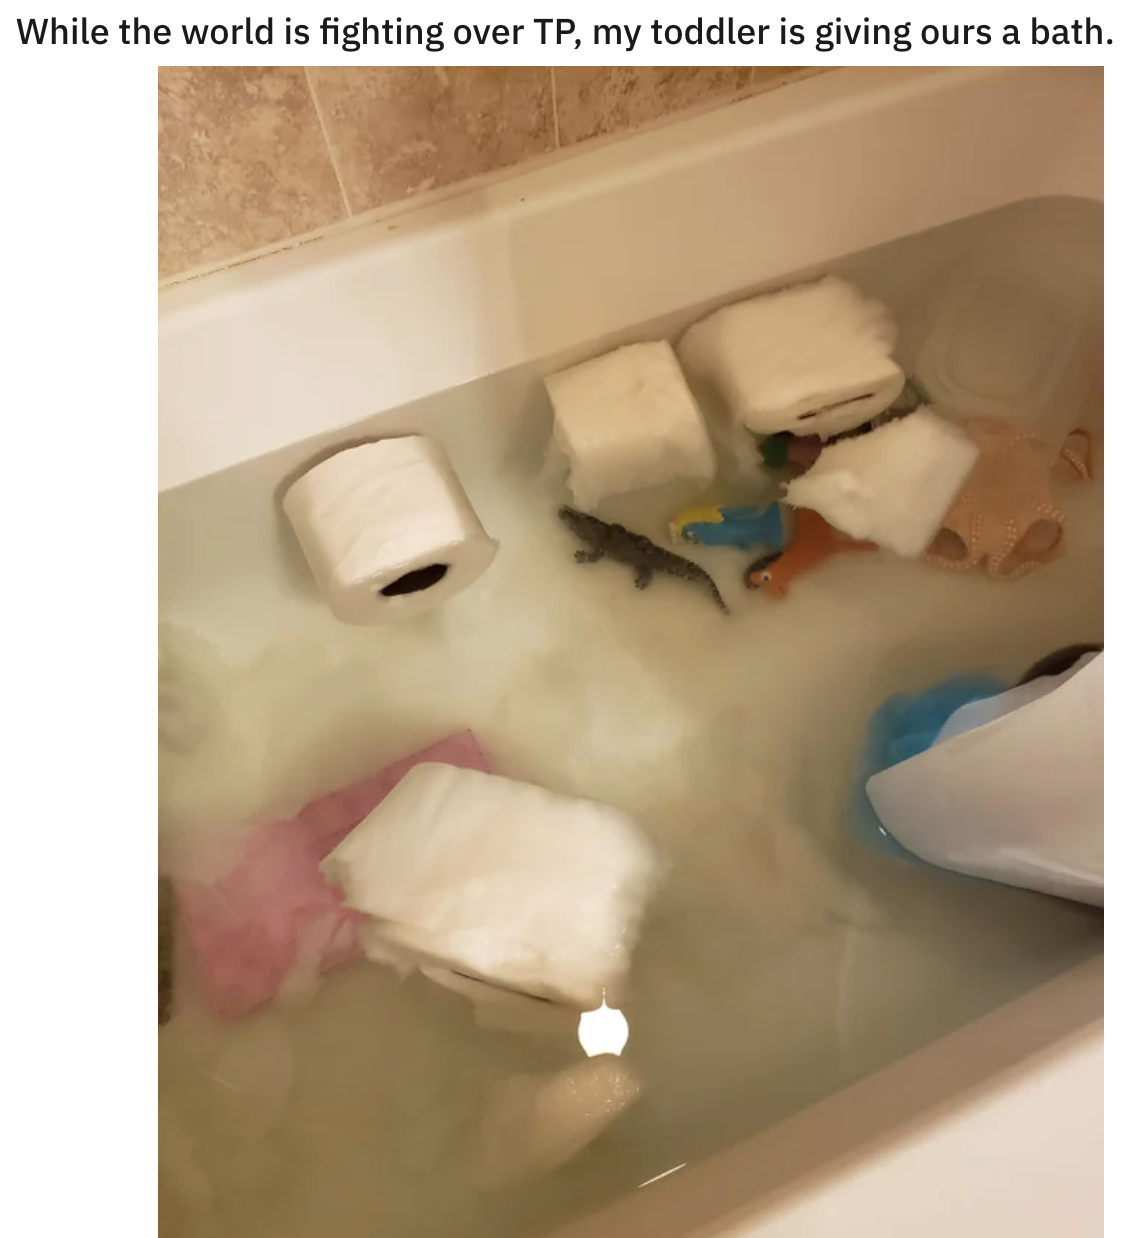 funny kid fails - While the world is fighting over Tp, my toddler is giving ours a bath.